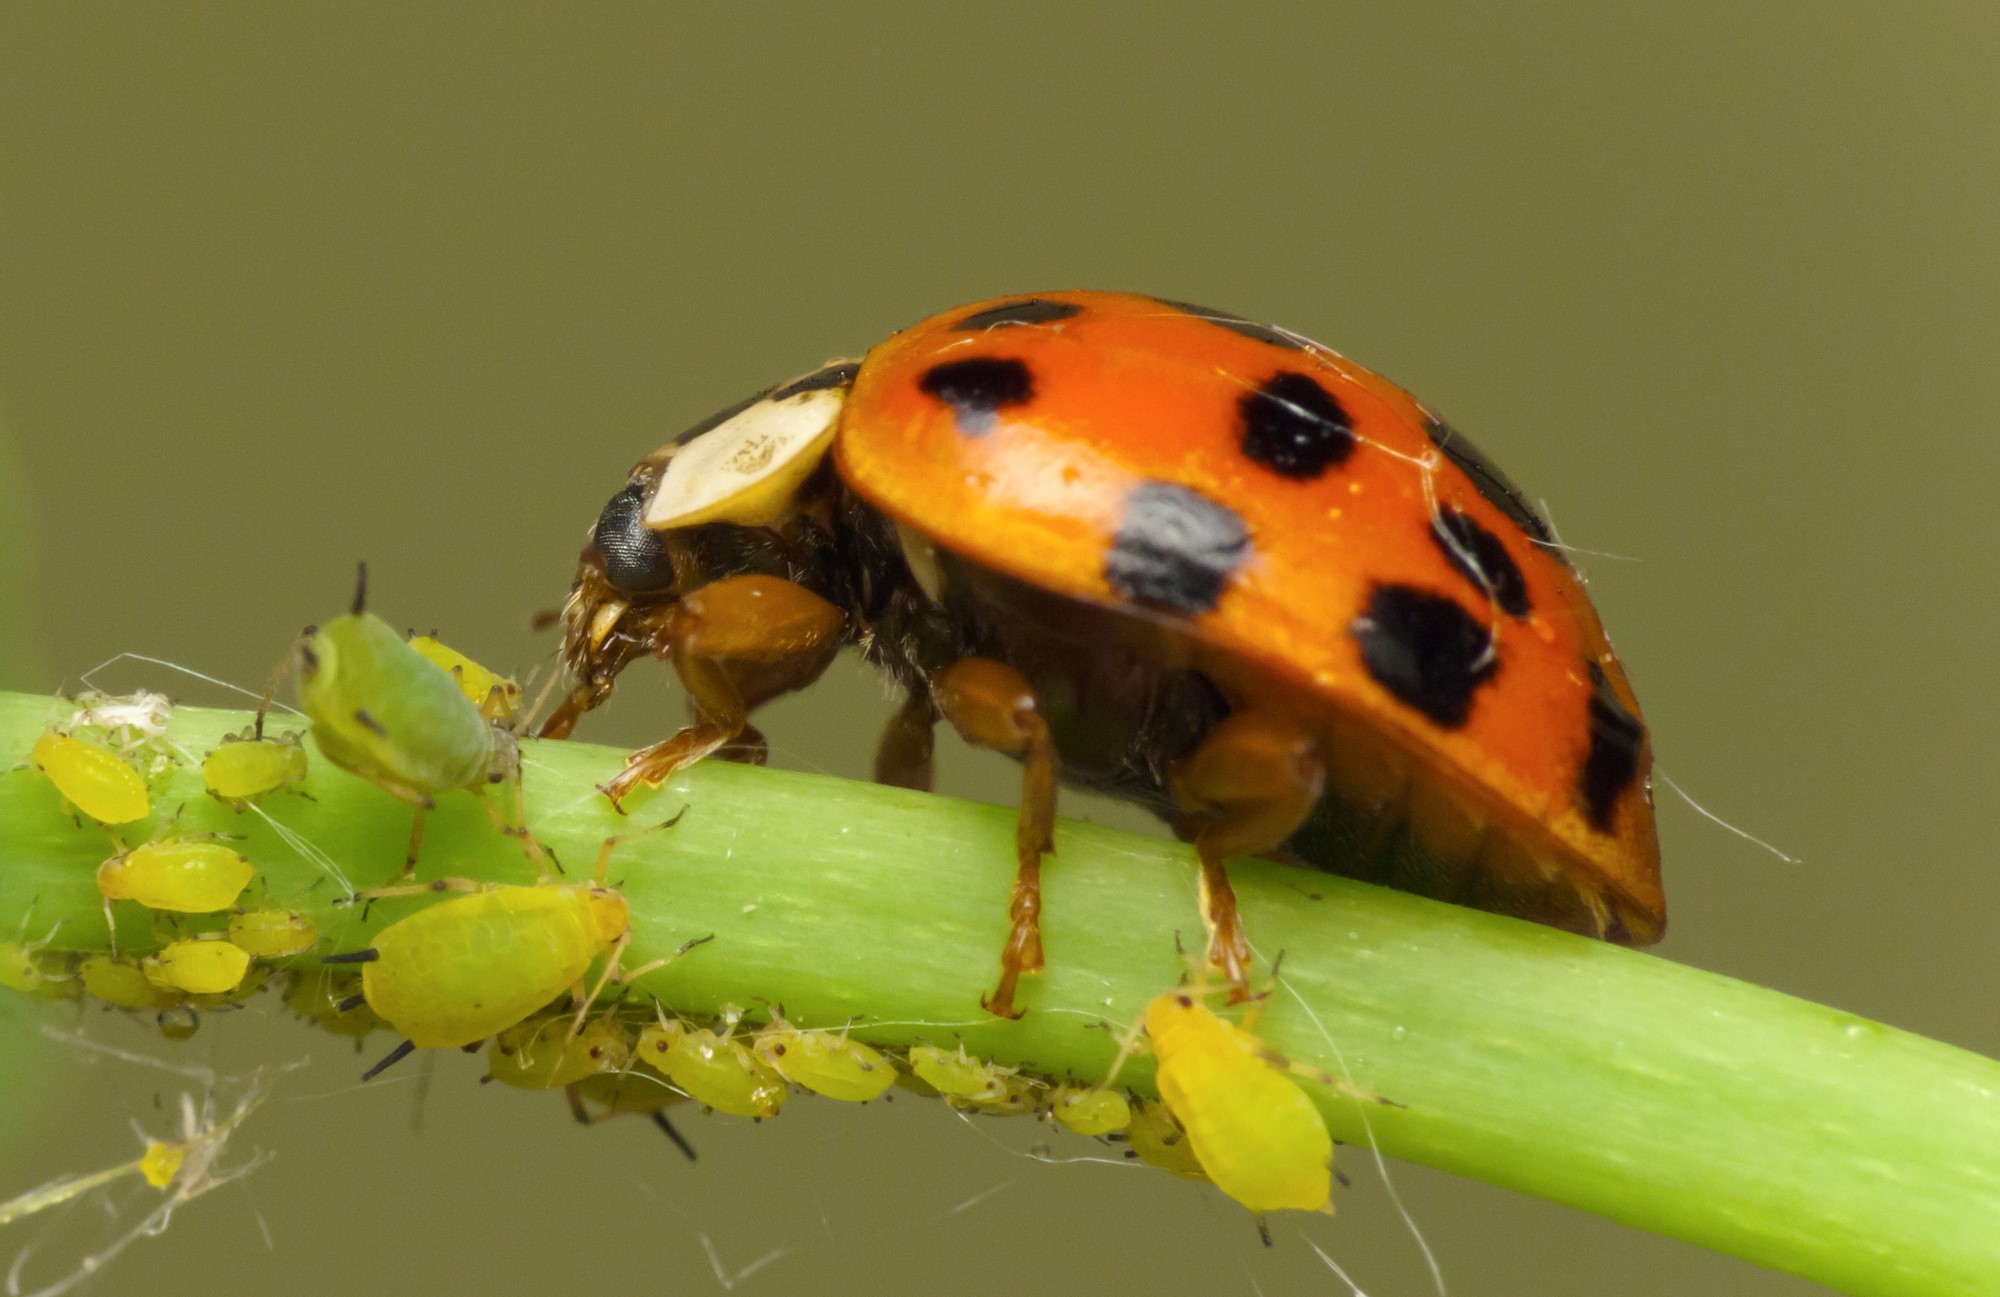 adult ladybug, red with black spots, stands on a green stem eating a group of aphids